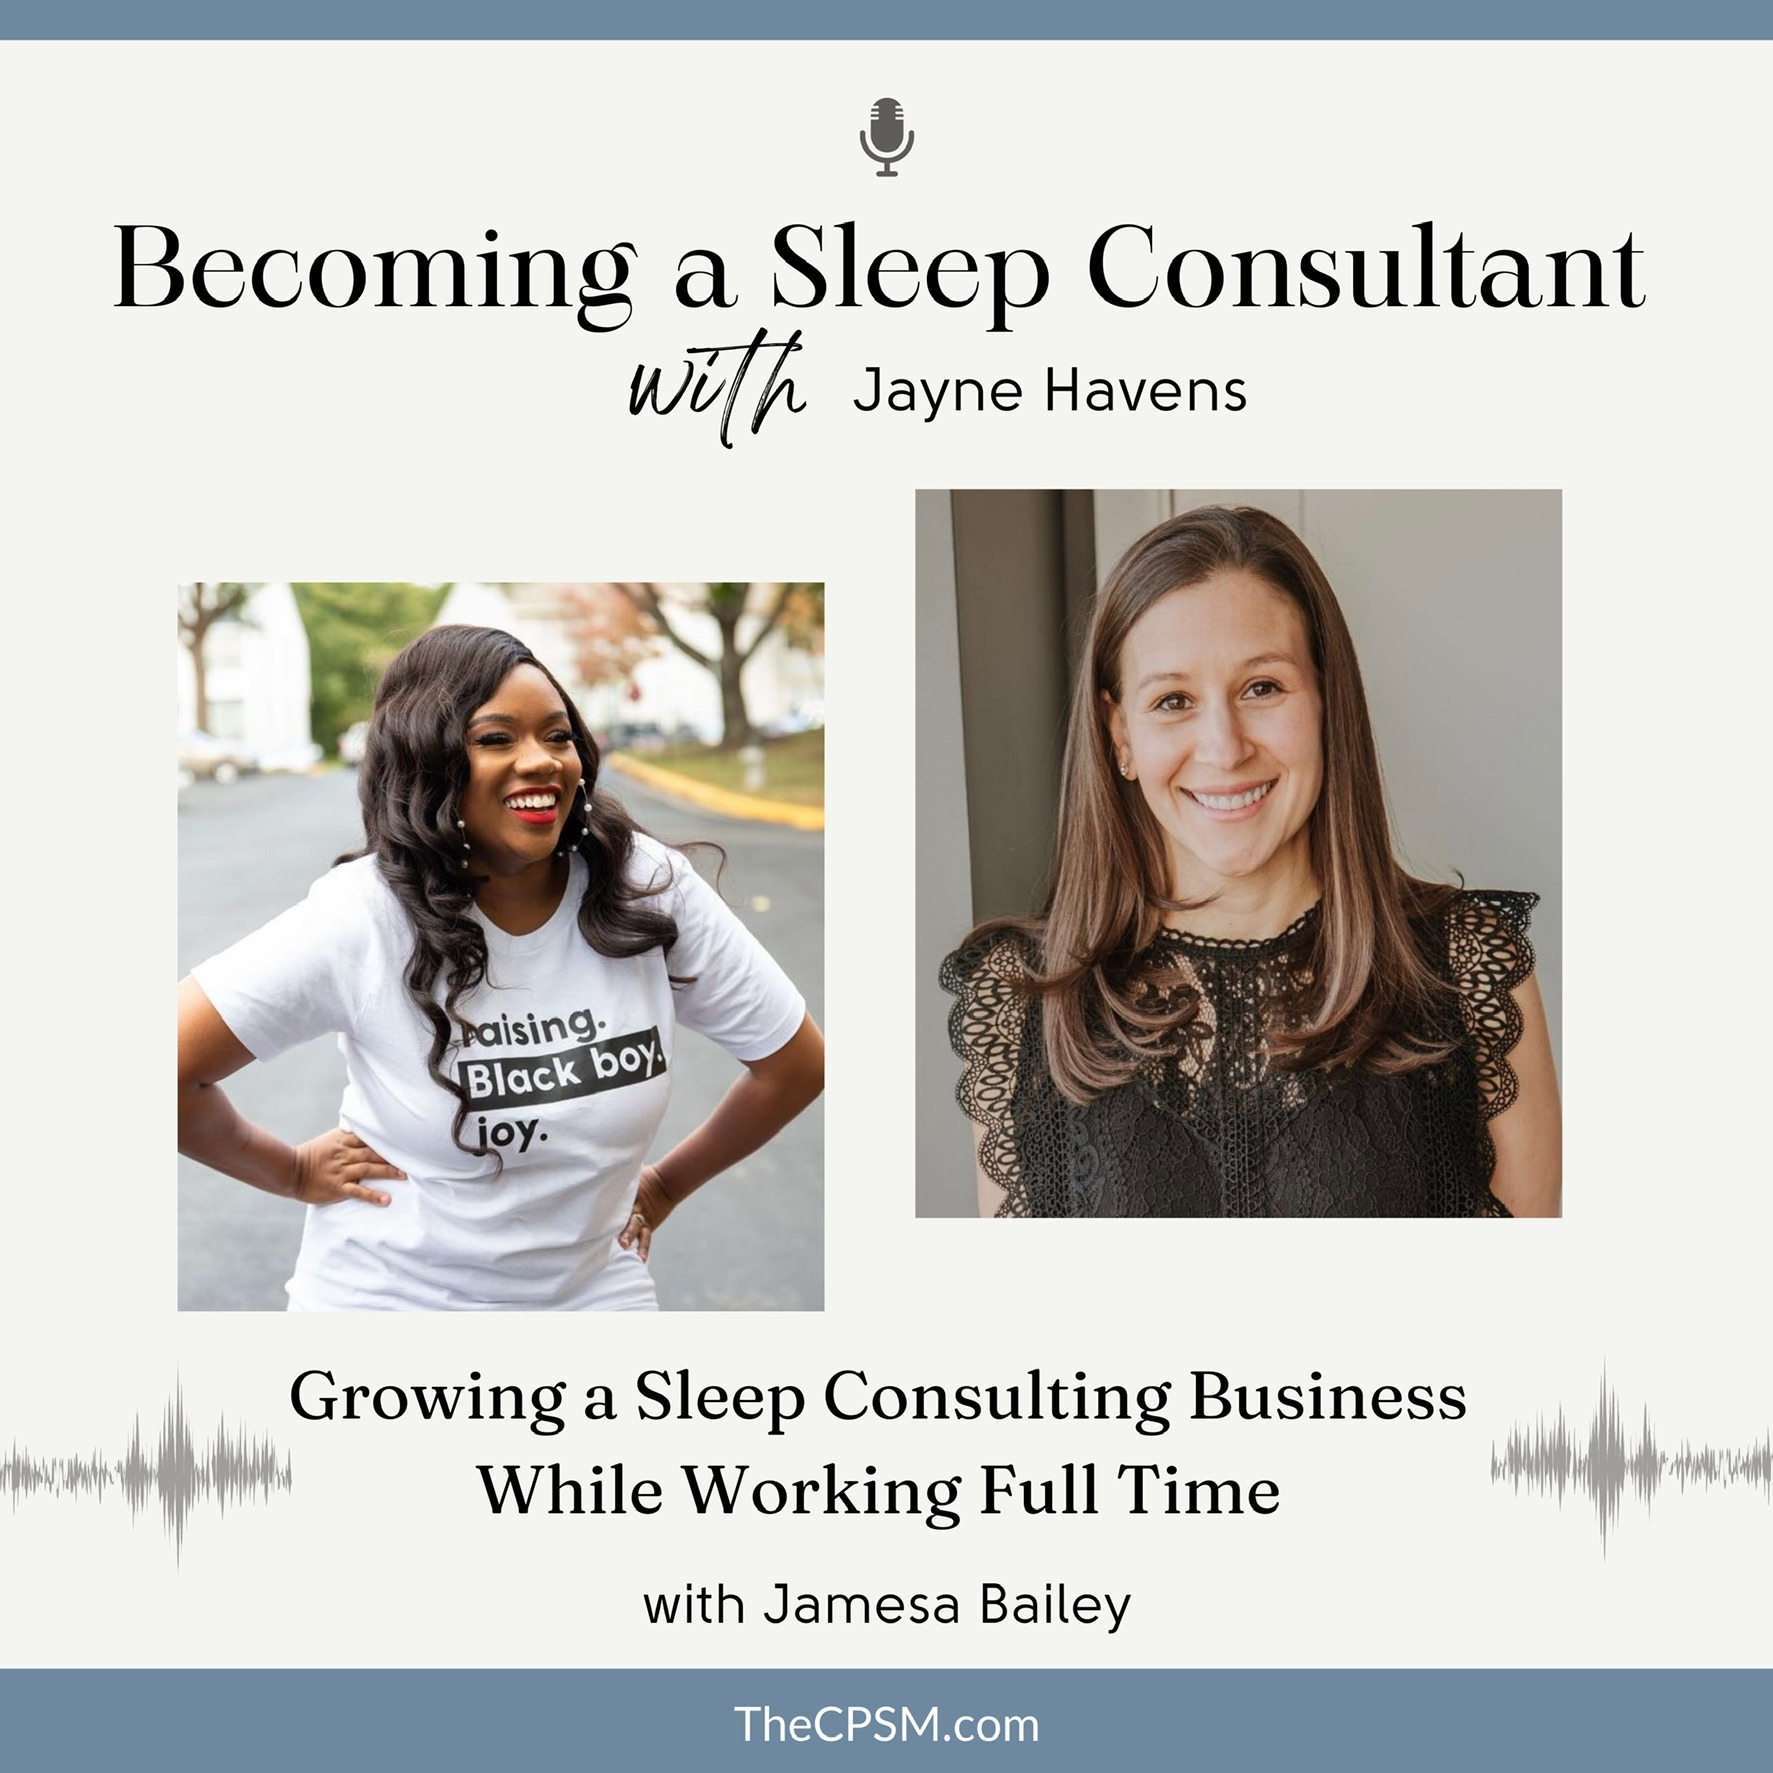 Growing Your Sleep Consulting Business While Working Full Time with Jamesa Bailey